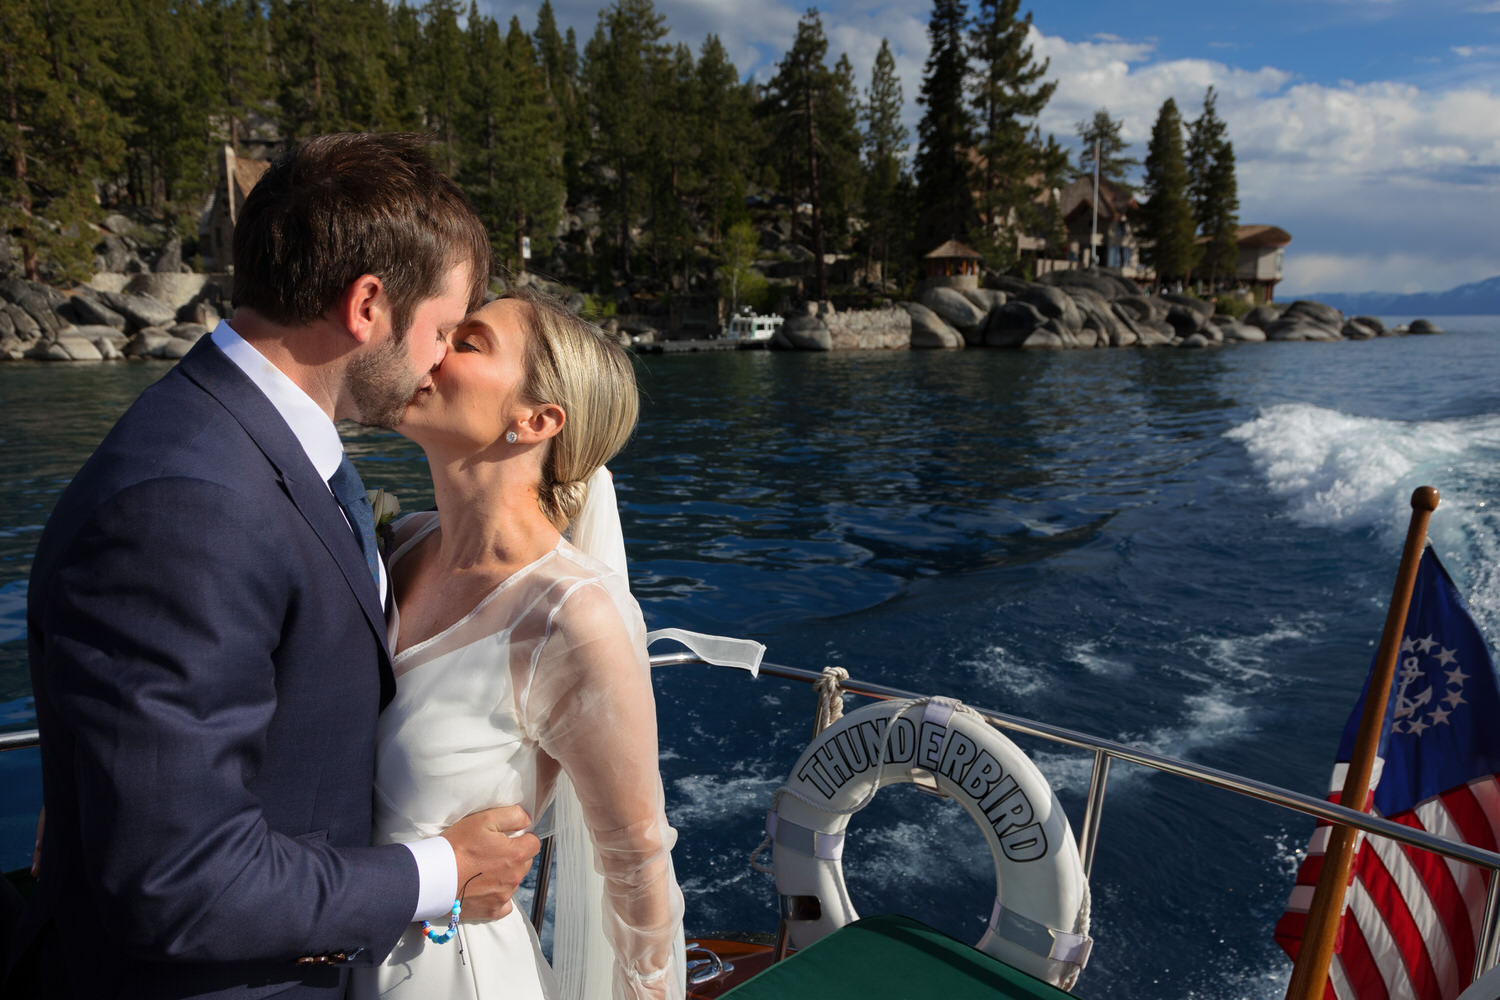 A bride and groom enjoy a romantic boat ride on Lake Tahoe after their wedding.